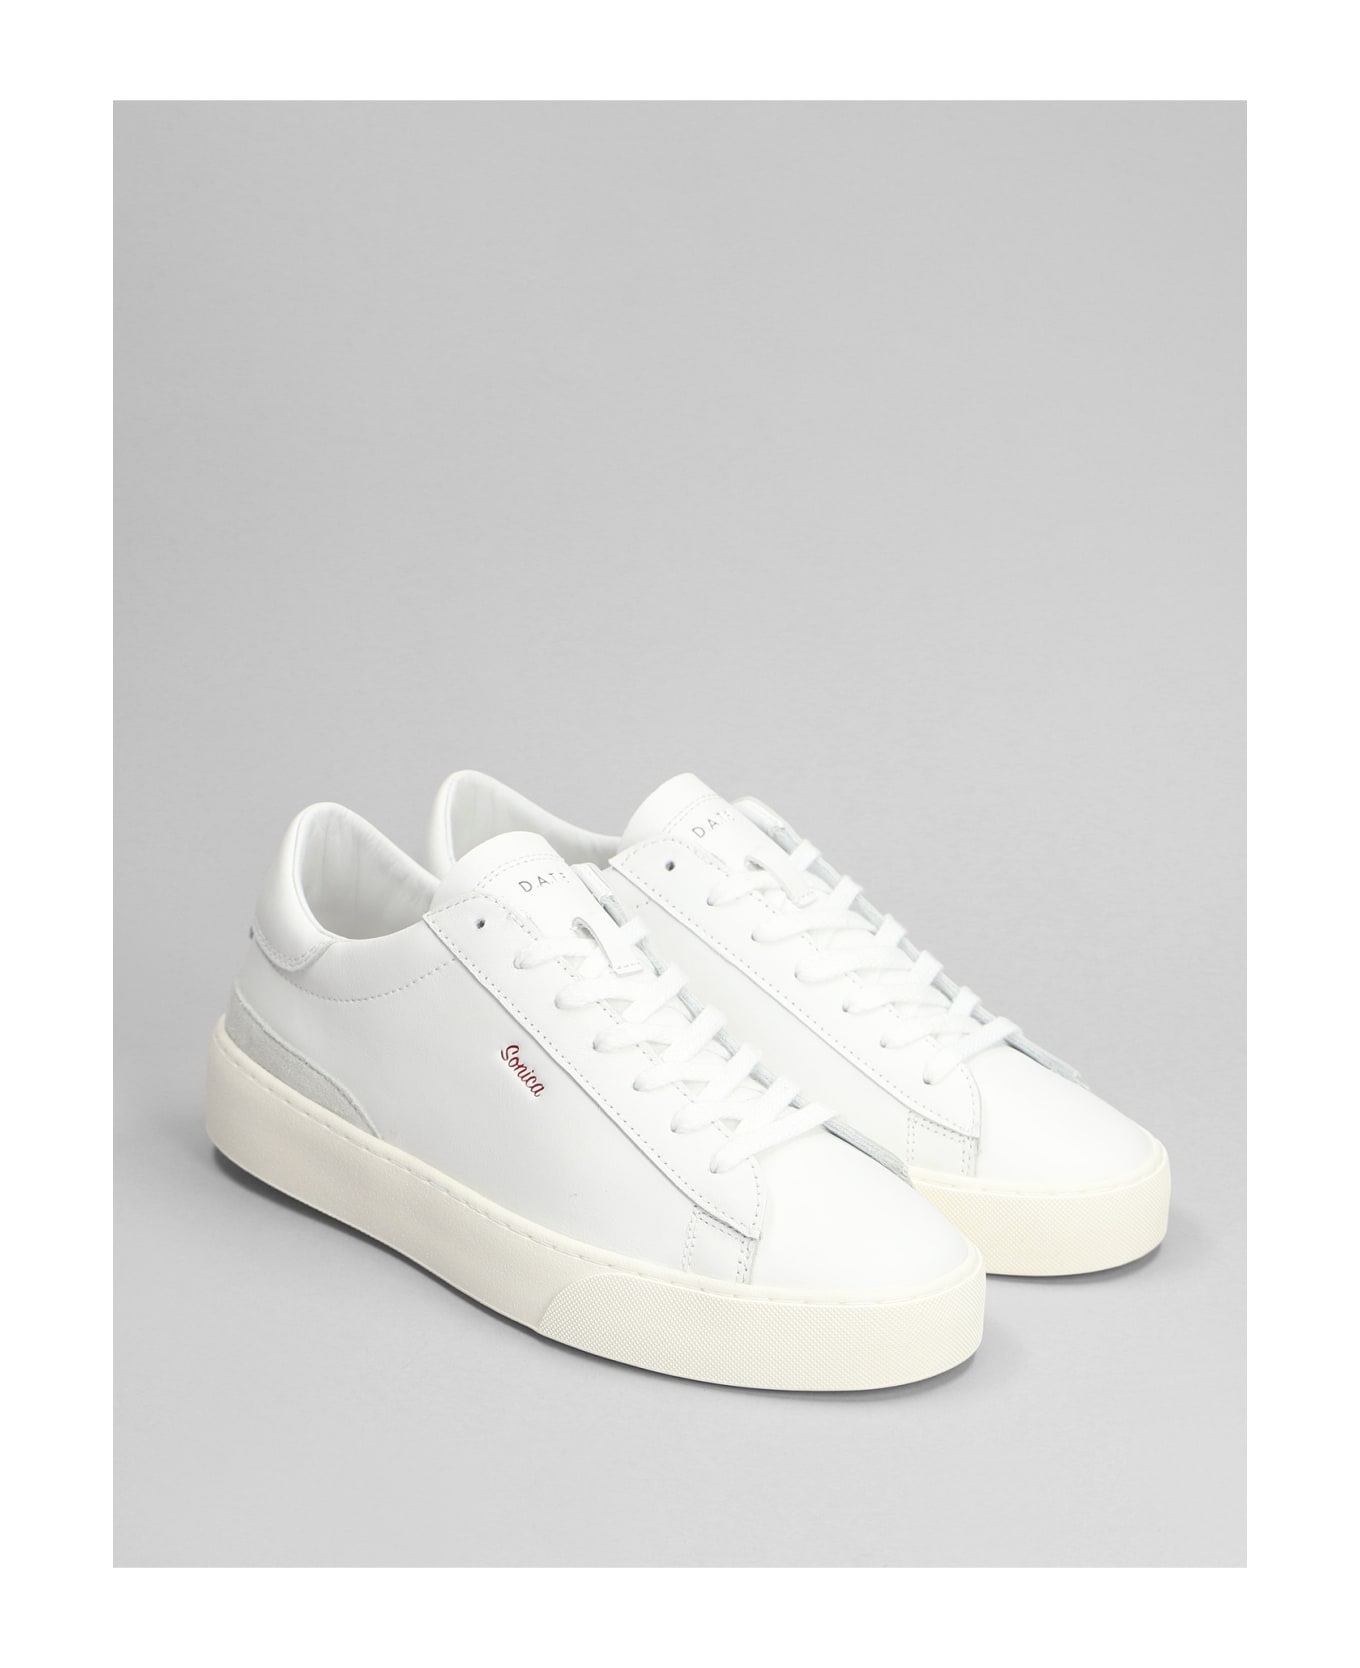 D.A.T.E. Sonica Sneakers In White Leather - white スニーカー